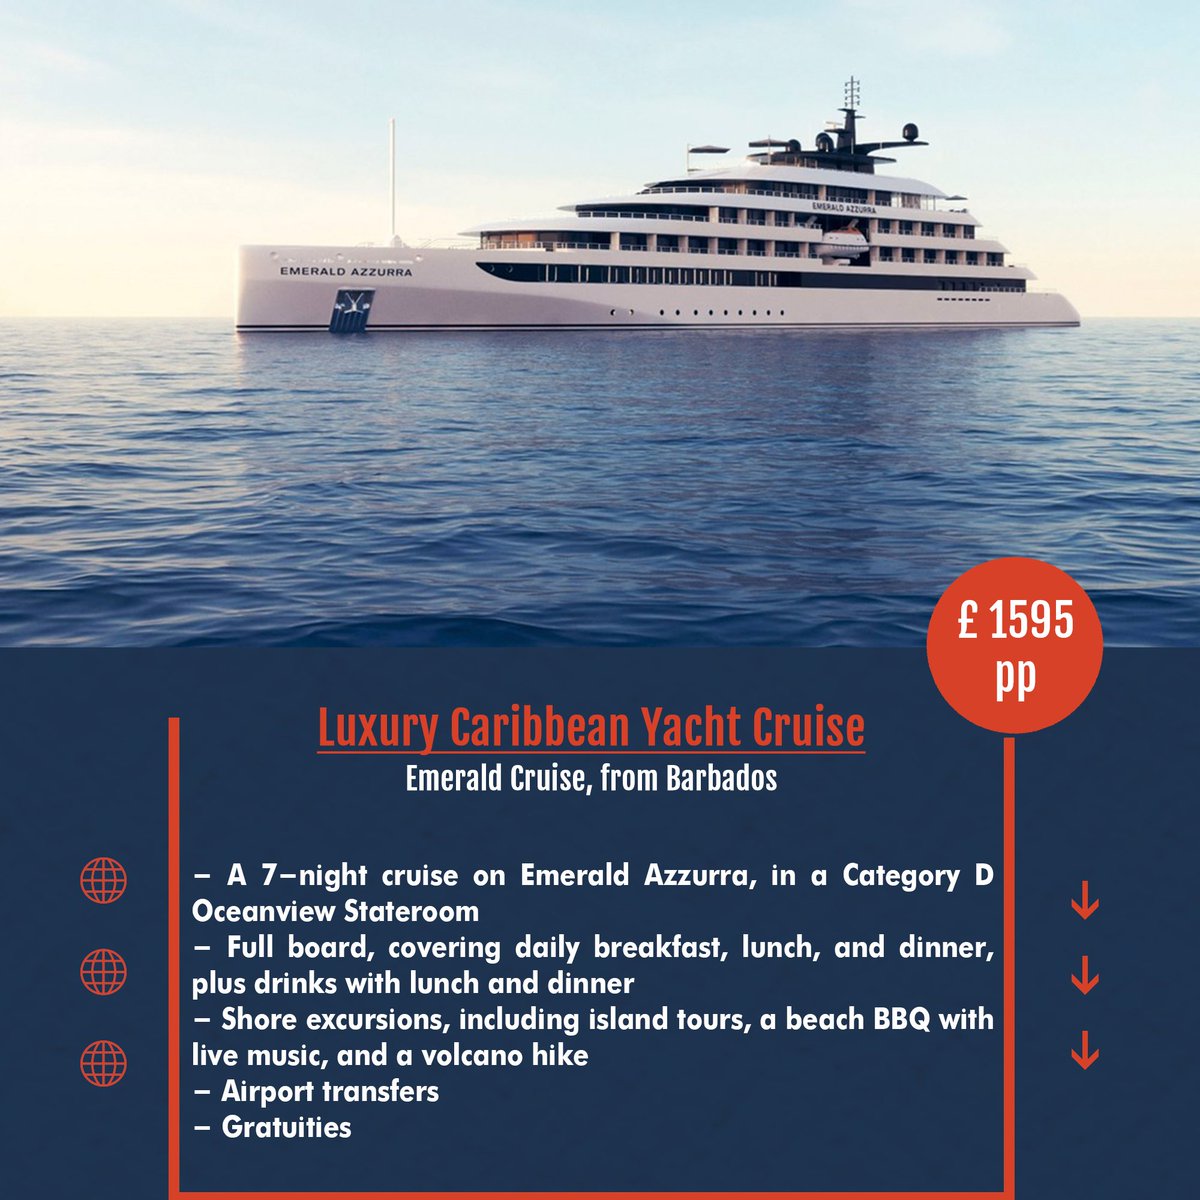 Explore Carribean on a Luxury Caribbean Yacht Cruise. For booking,

Call Us on 📞0203 818 7475 or 📩sales@birdtravel.co.uk

#birdtravel #england #uk #manchester #liverpool #southampton #london #travelinspiration #travelinspiration #caribbean #caribbeanfood #yachtcruise